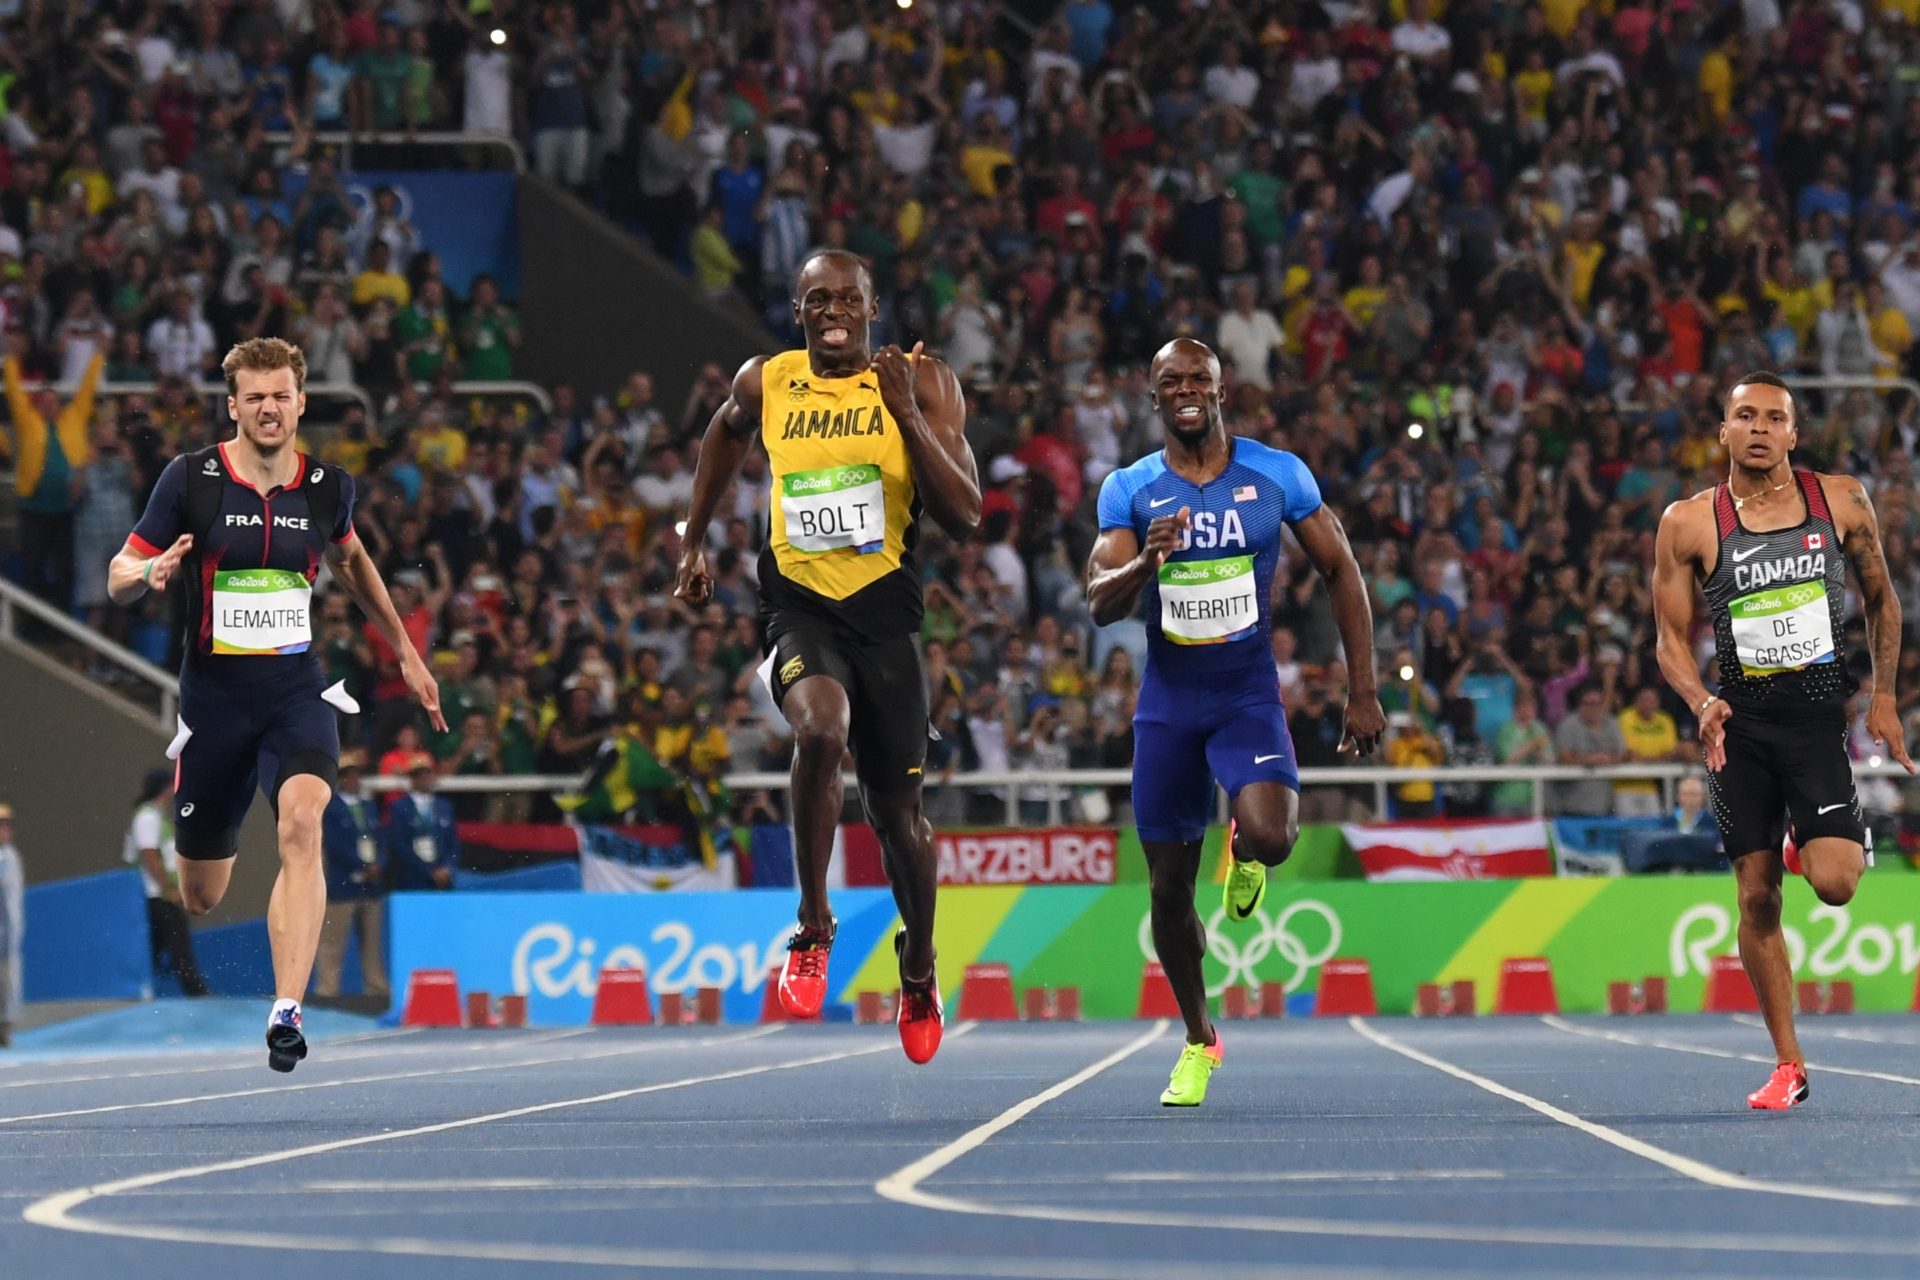 Sprinting’s dominant force: Why is Jamaica so good on the track?